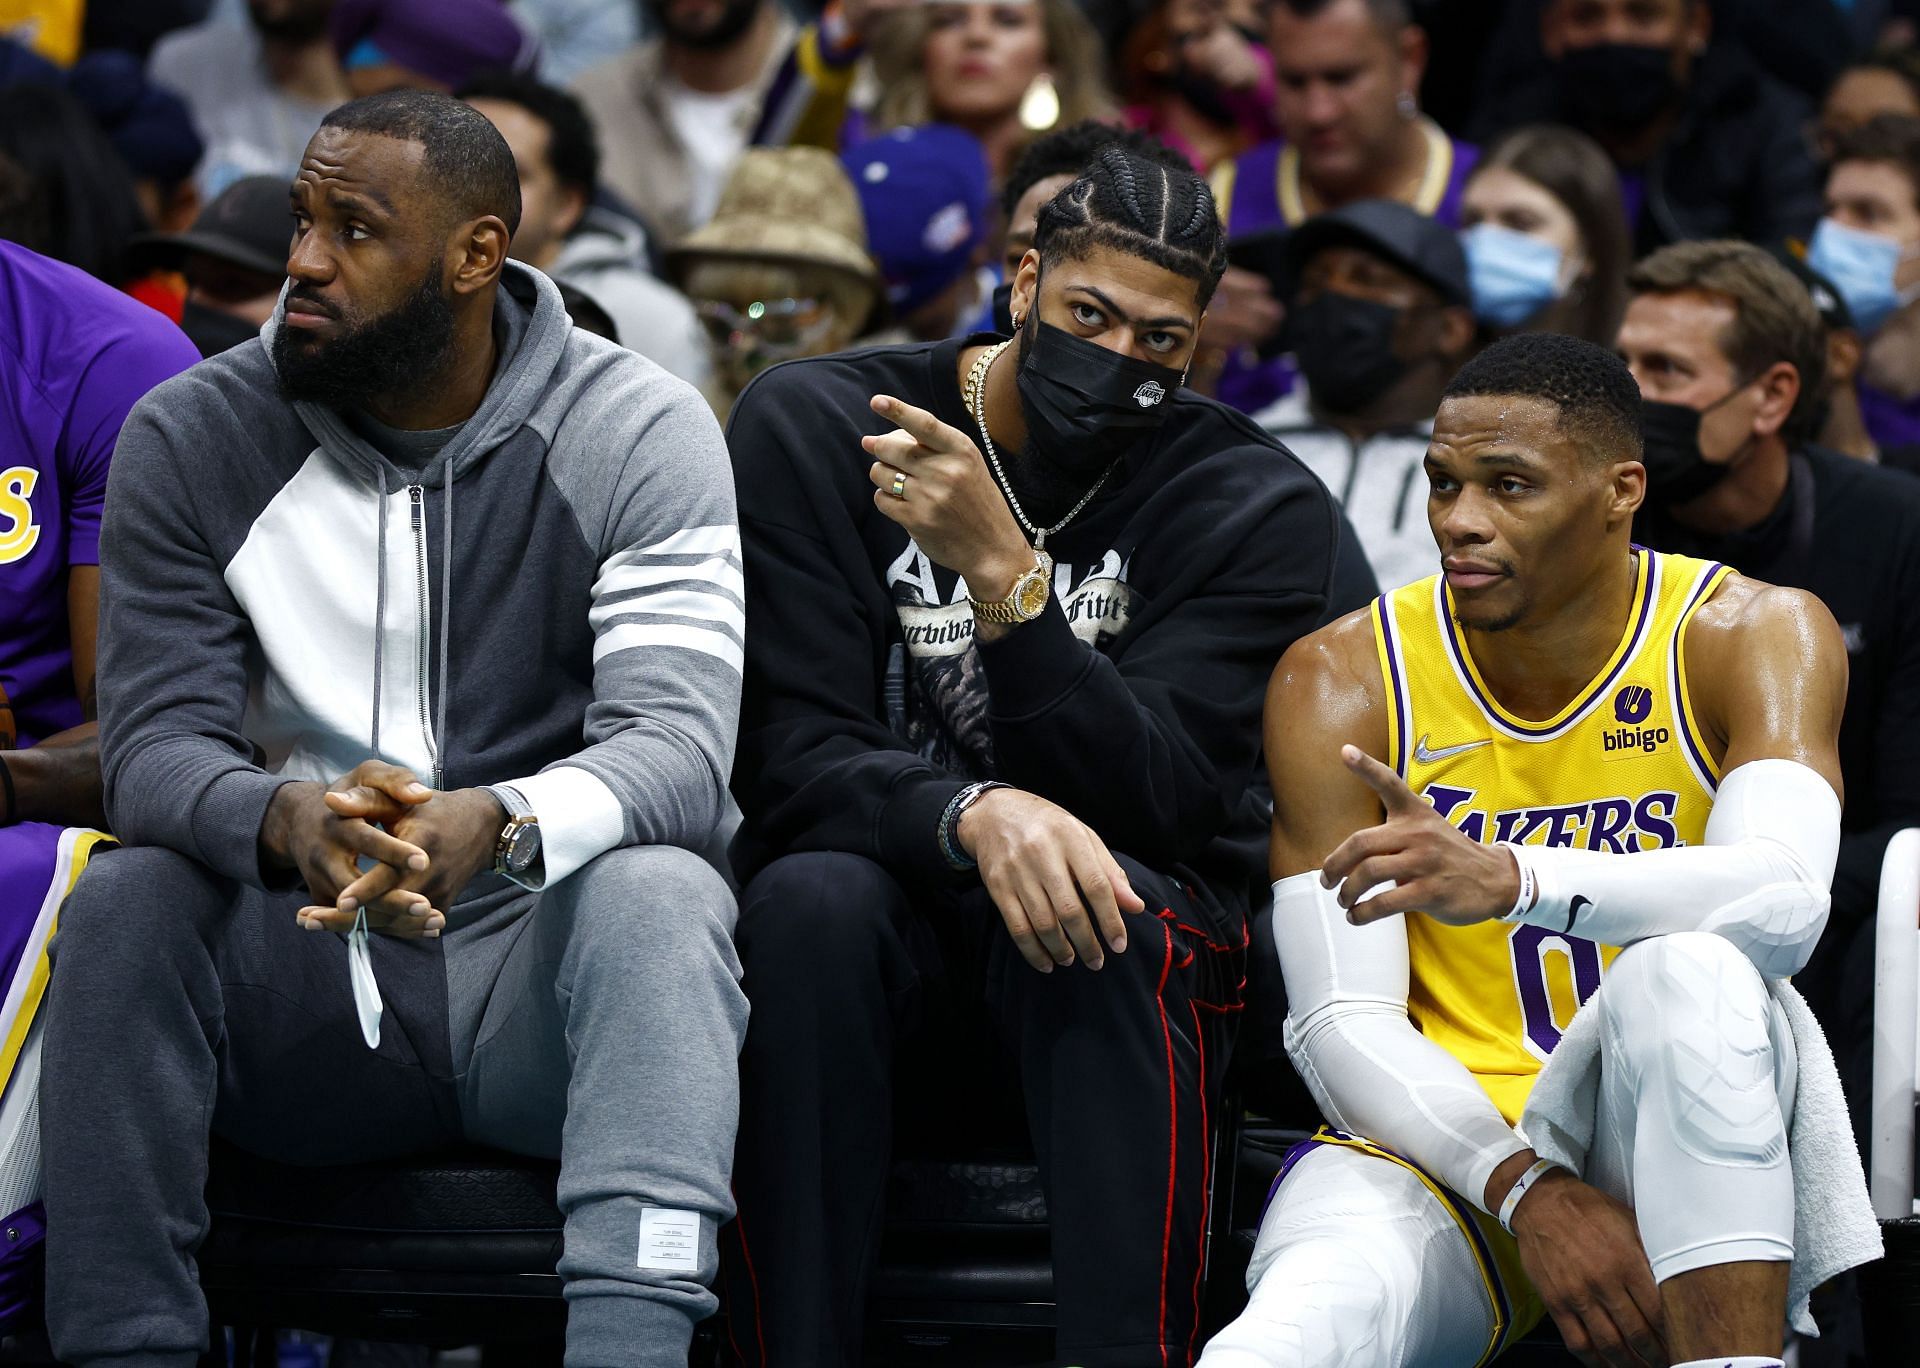 (L-R)LeBron James #6, Anthony Davis #3, and Russell Westbrook #0 of the LA Lakers look on from the sideline during the first half of the game against the Charlotte Hornets at Spectrum Center on January 28, 2022 in Charlotte, North Carolina.